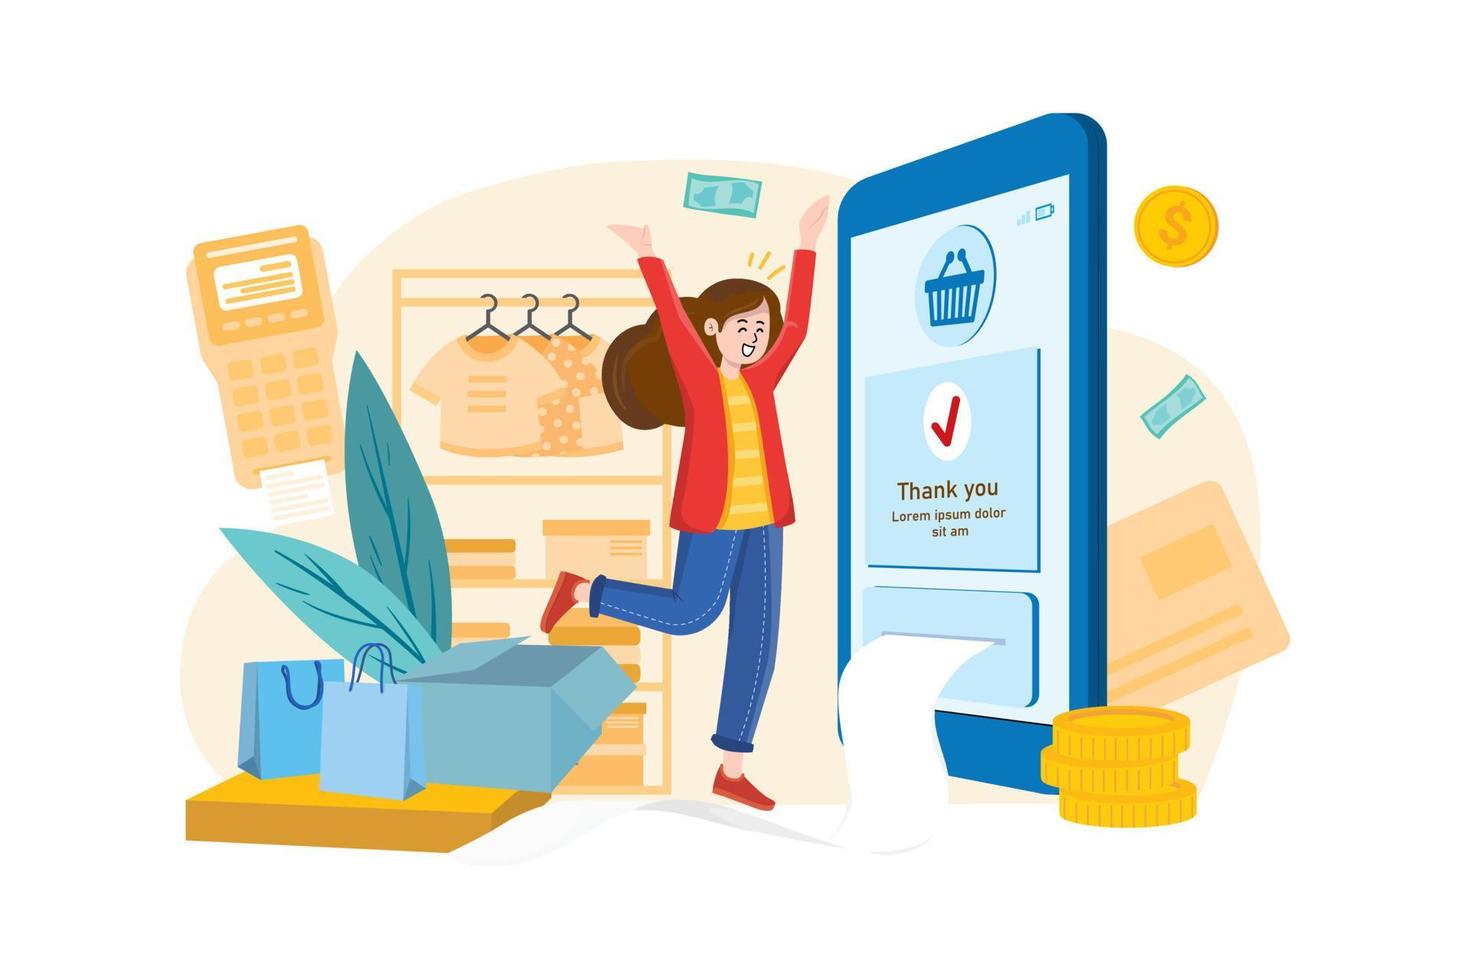 Mobile Payment Flat Illustrations Concept vector